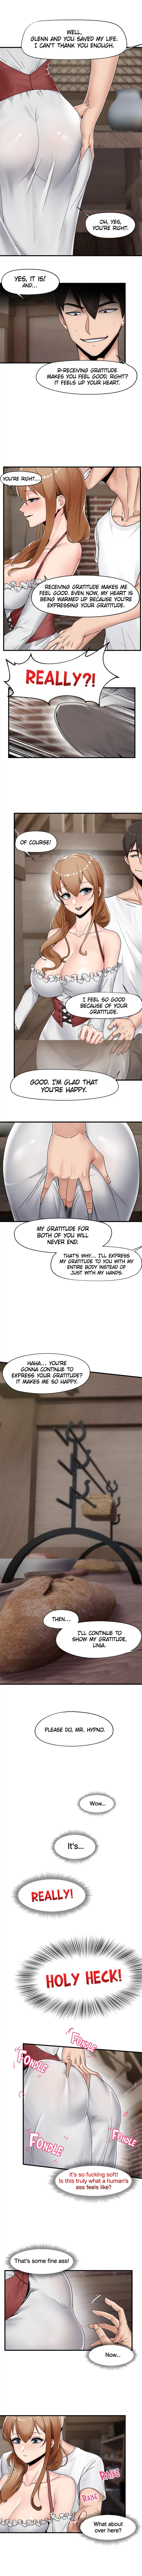 Absolute Hypnosis in Another World - Chapter 3 Page 4